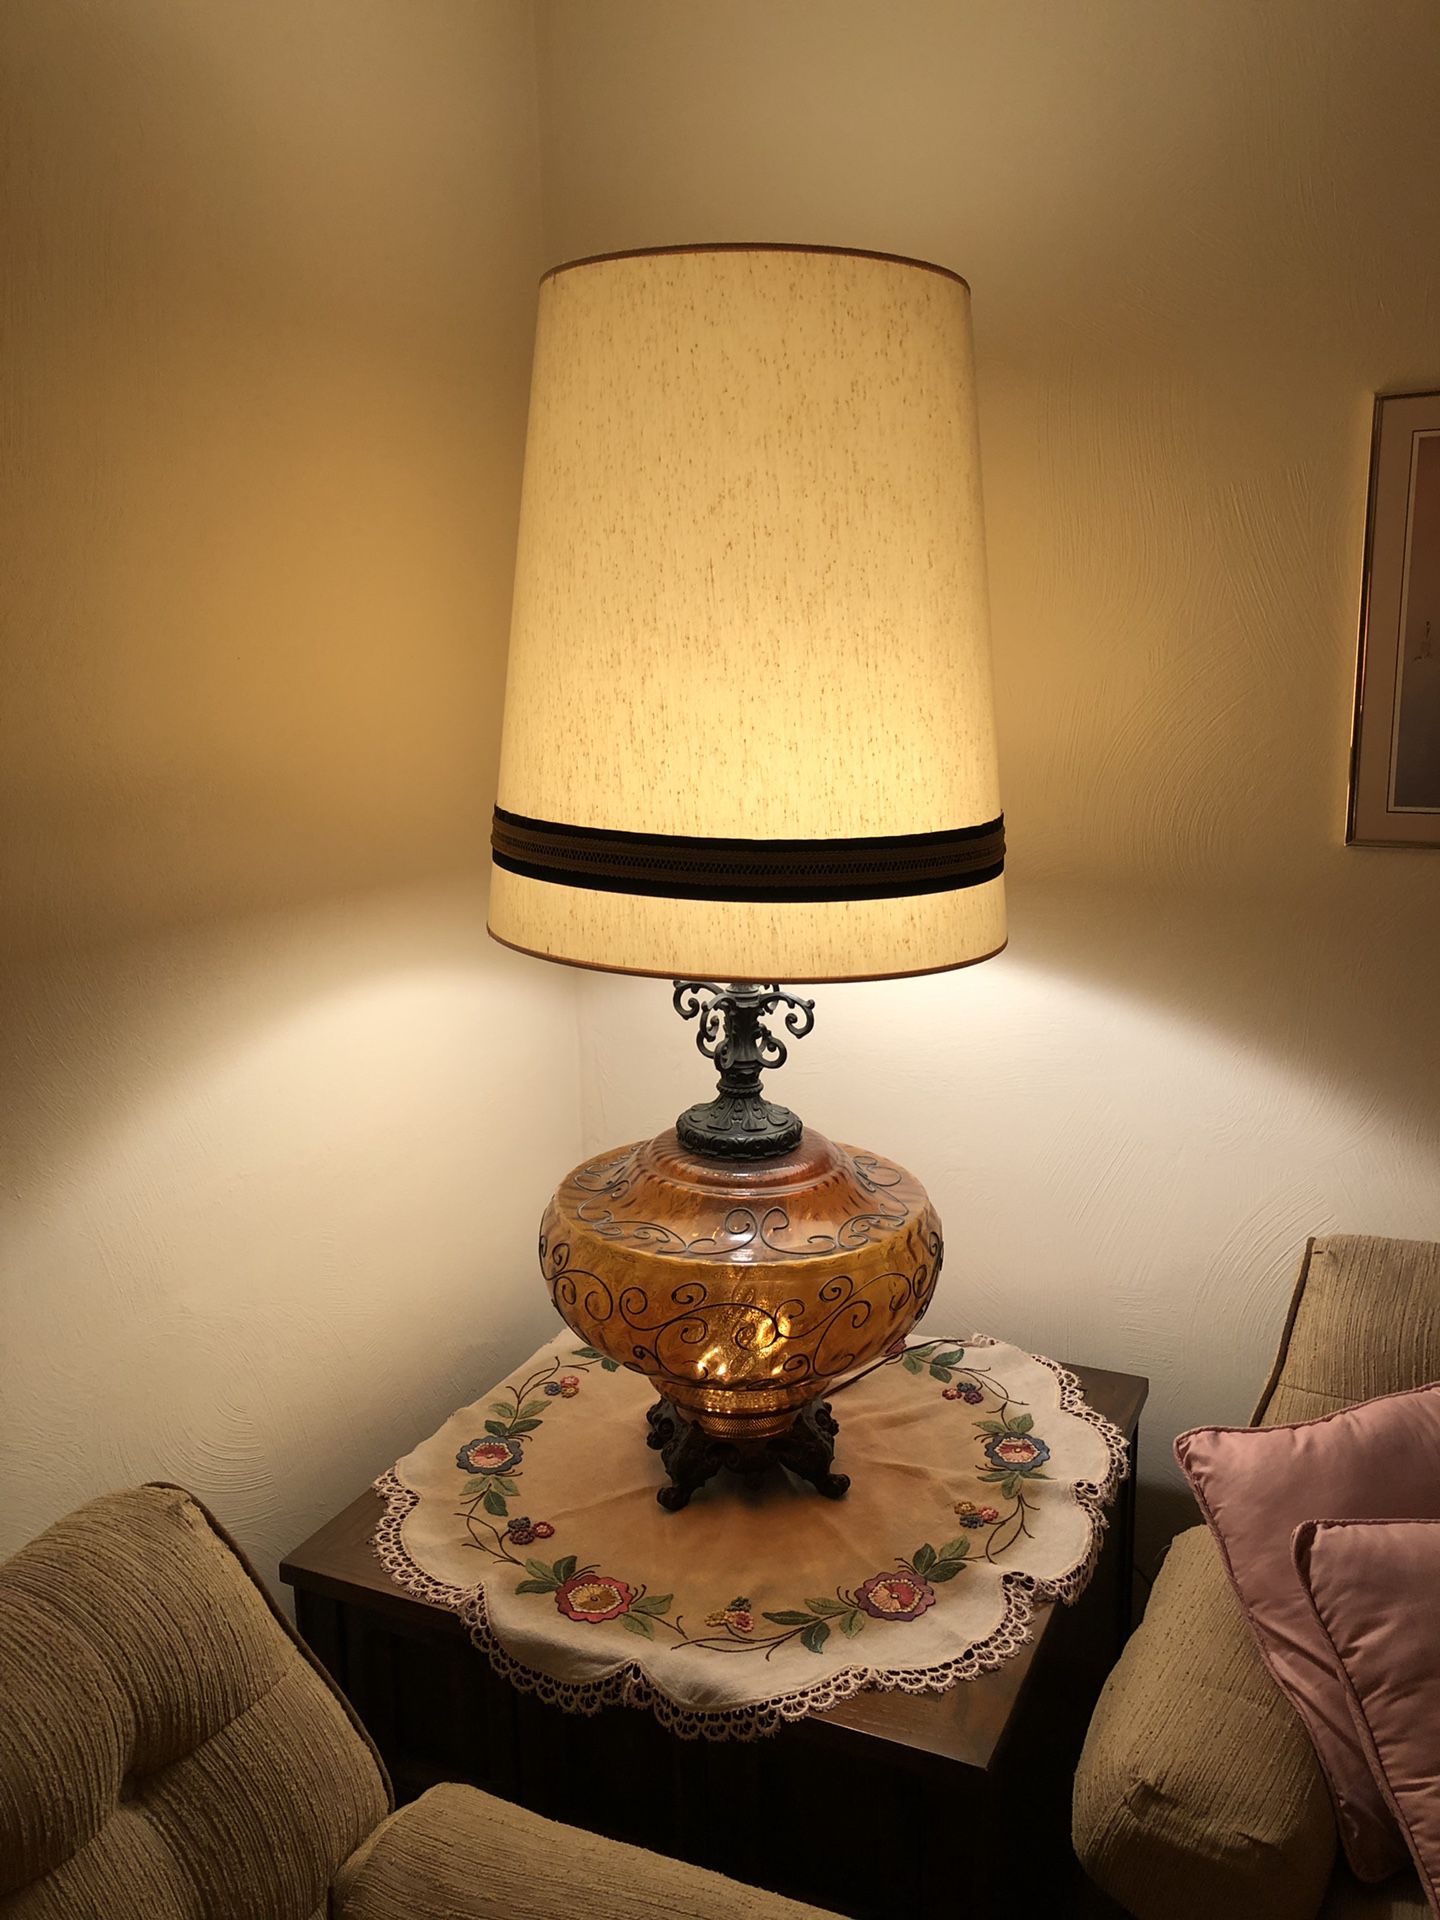 Large table lamp